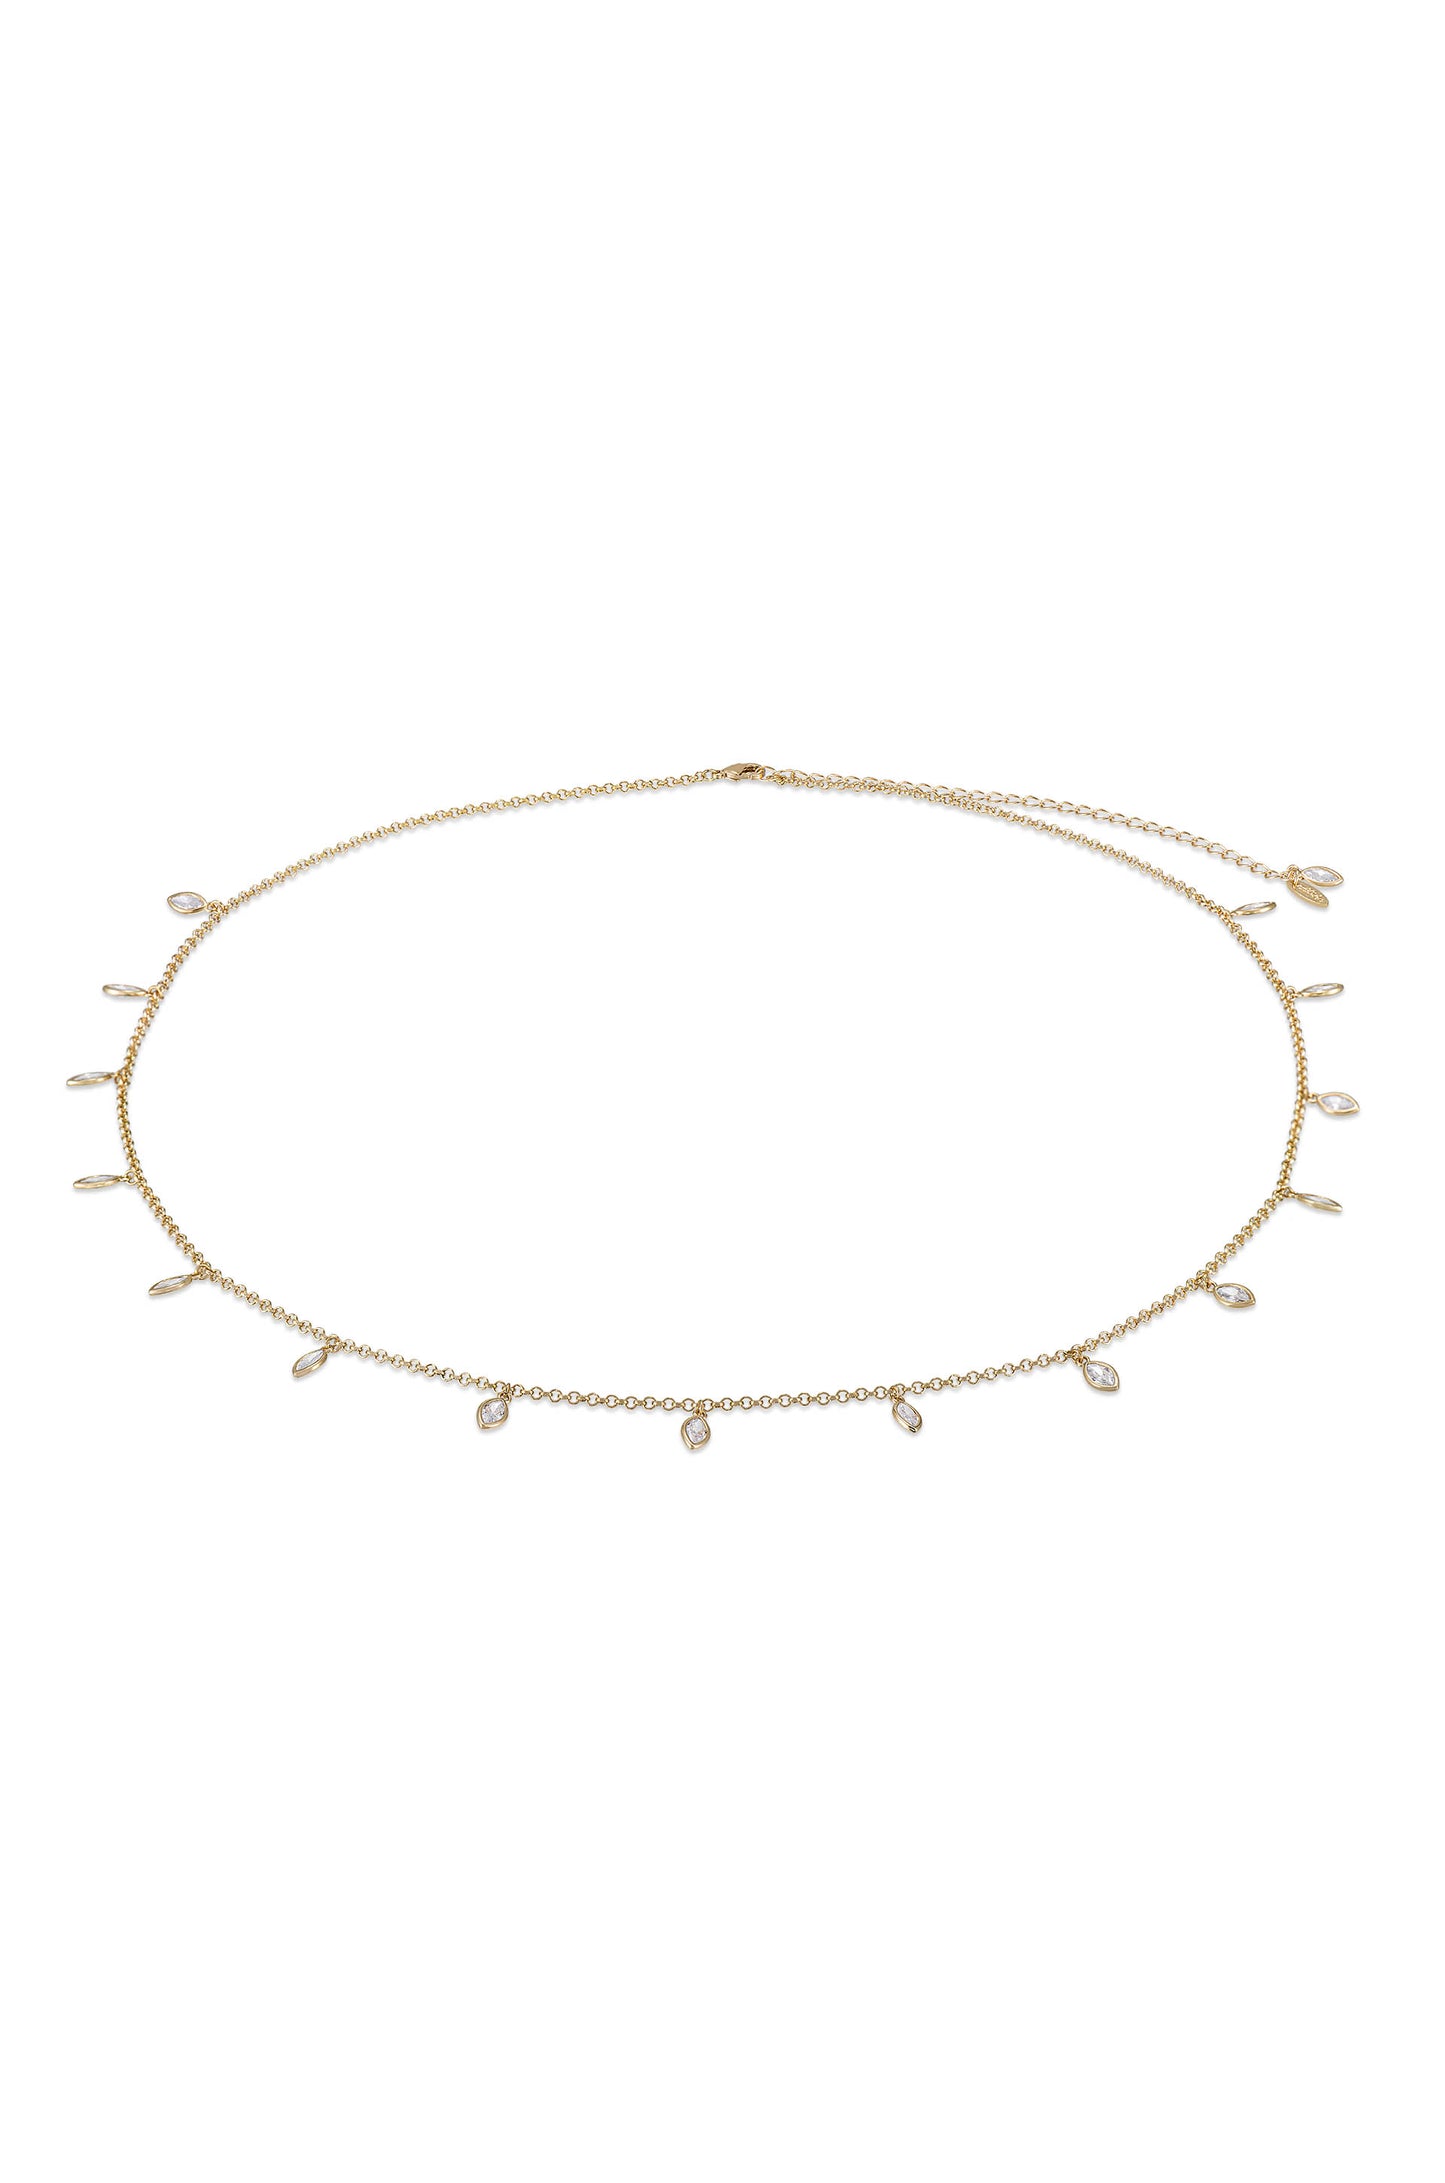 Crystal Droplet Thin Chain Gold Body Chain